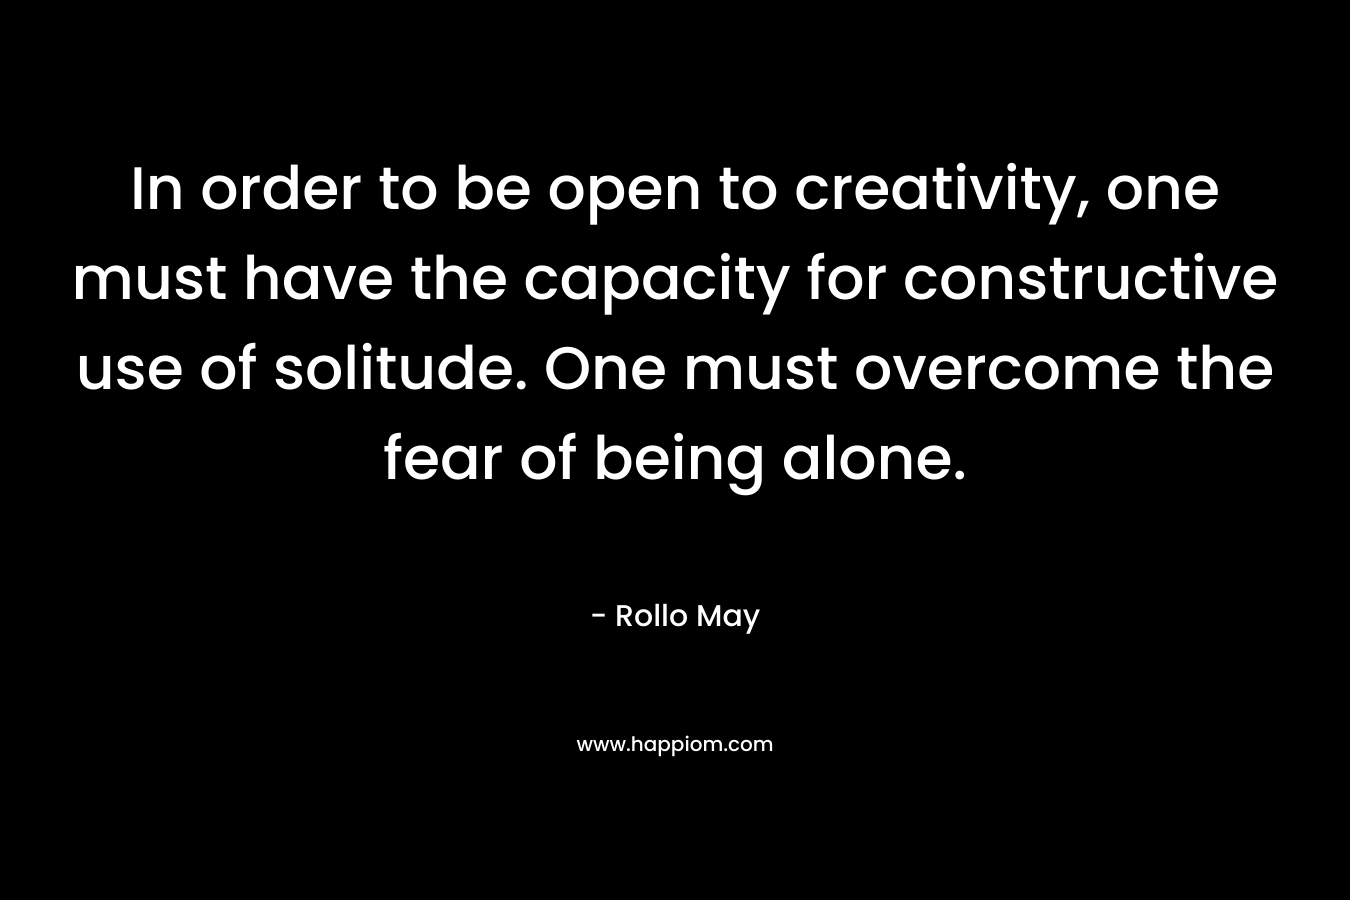 In order to be open to creativity, one must have the capacity for constructive use of solitude. One must overcome the fear of being alone.